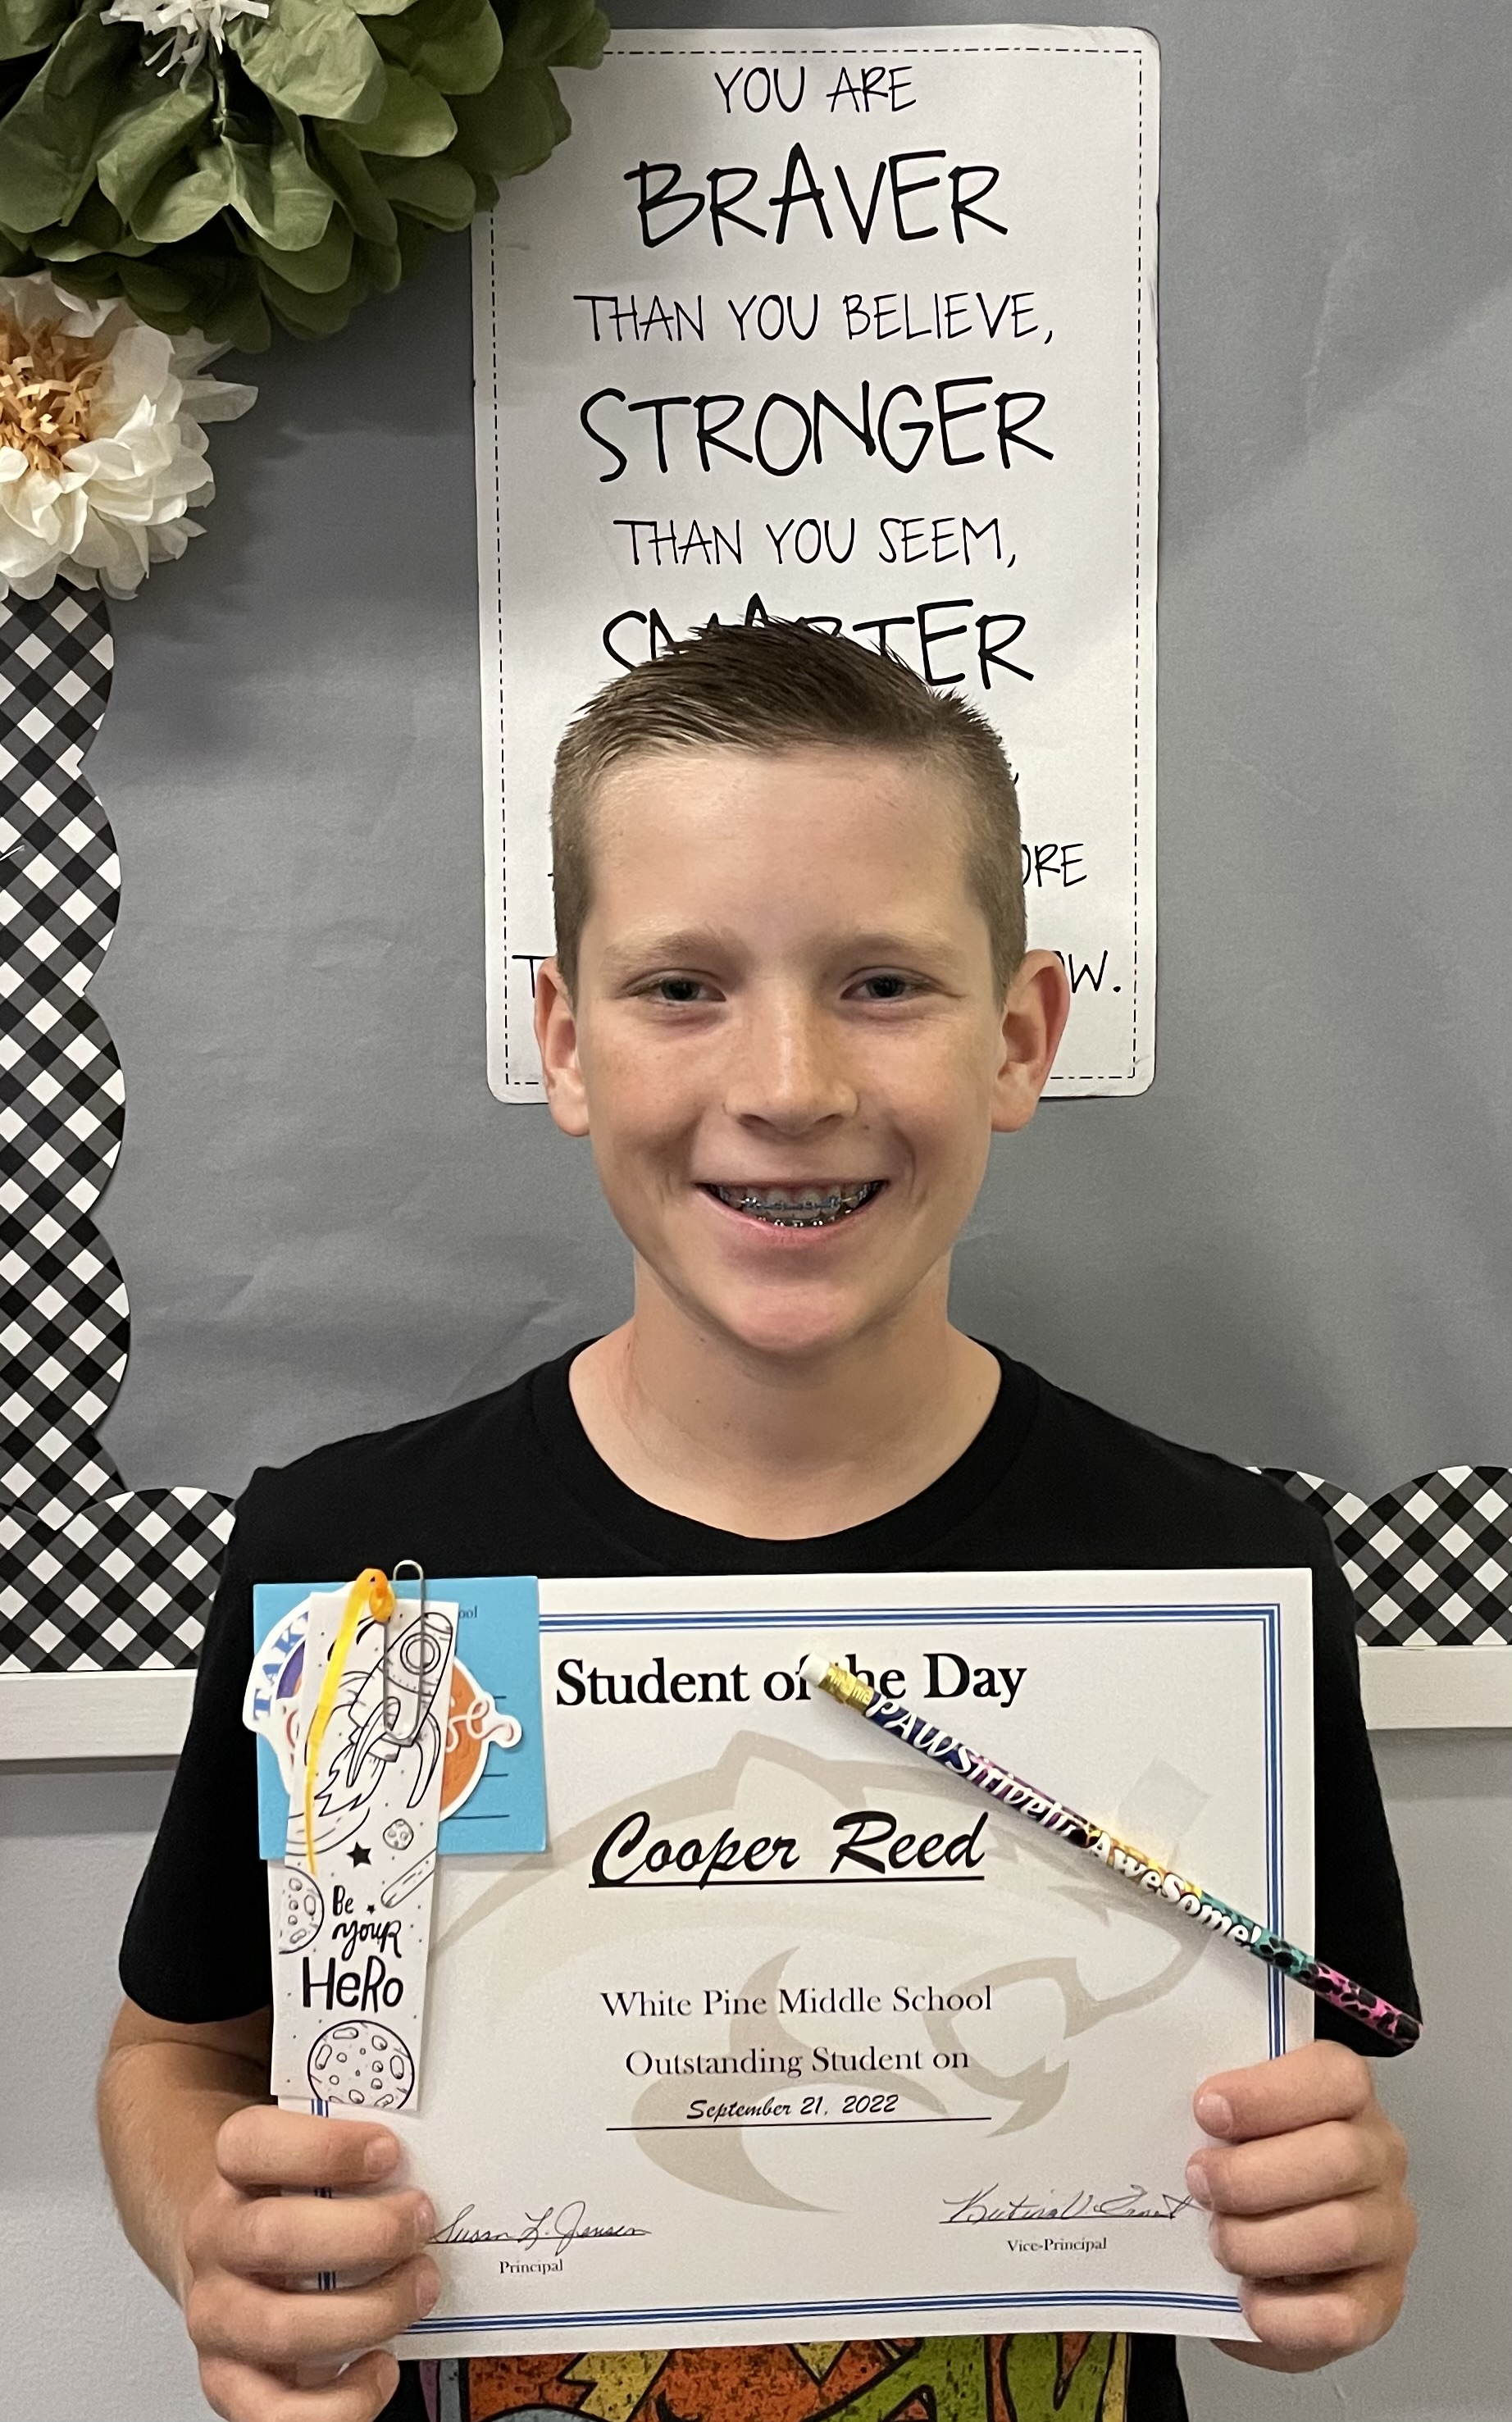 Student of the Day 9/21/22